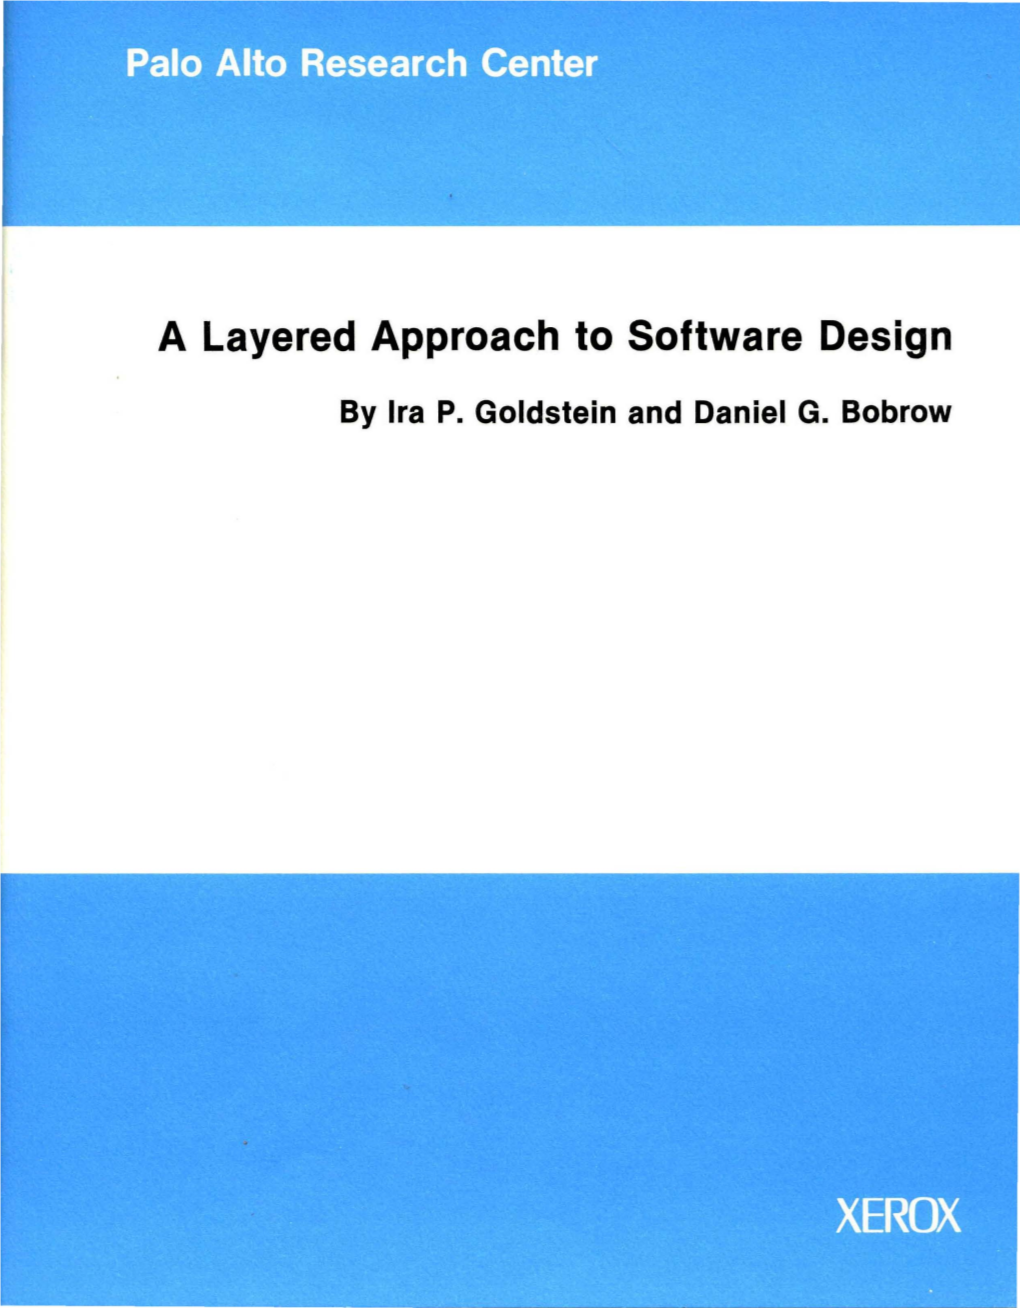 A Layered Approach to Software Design